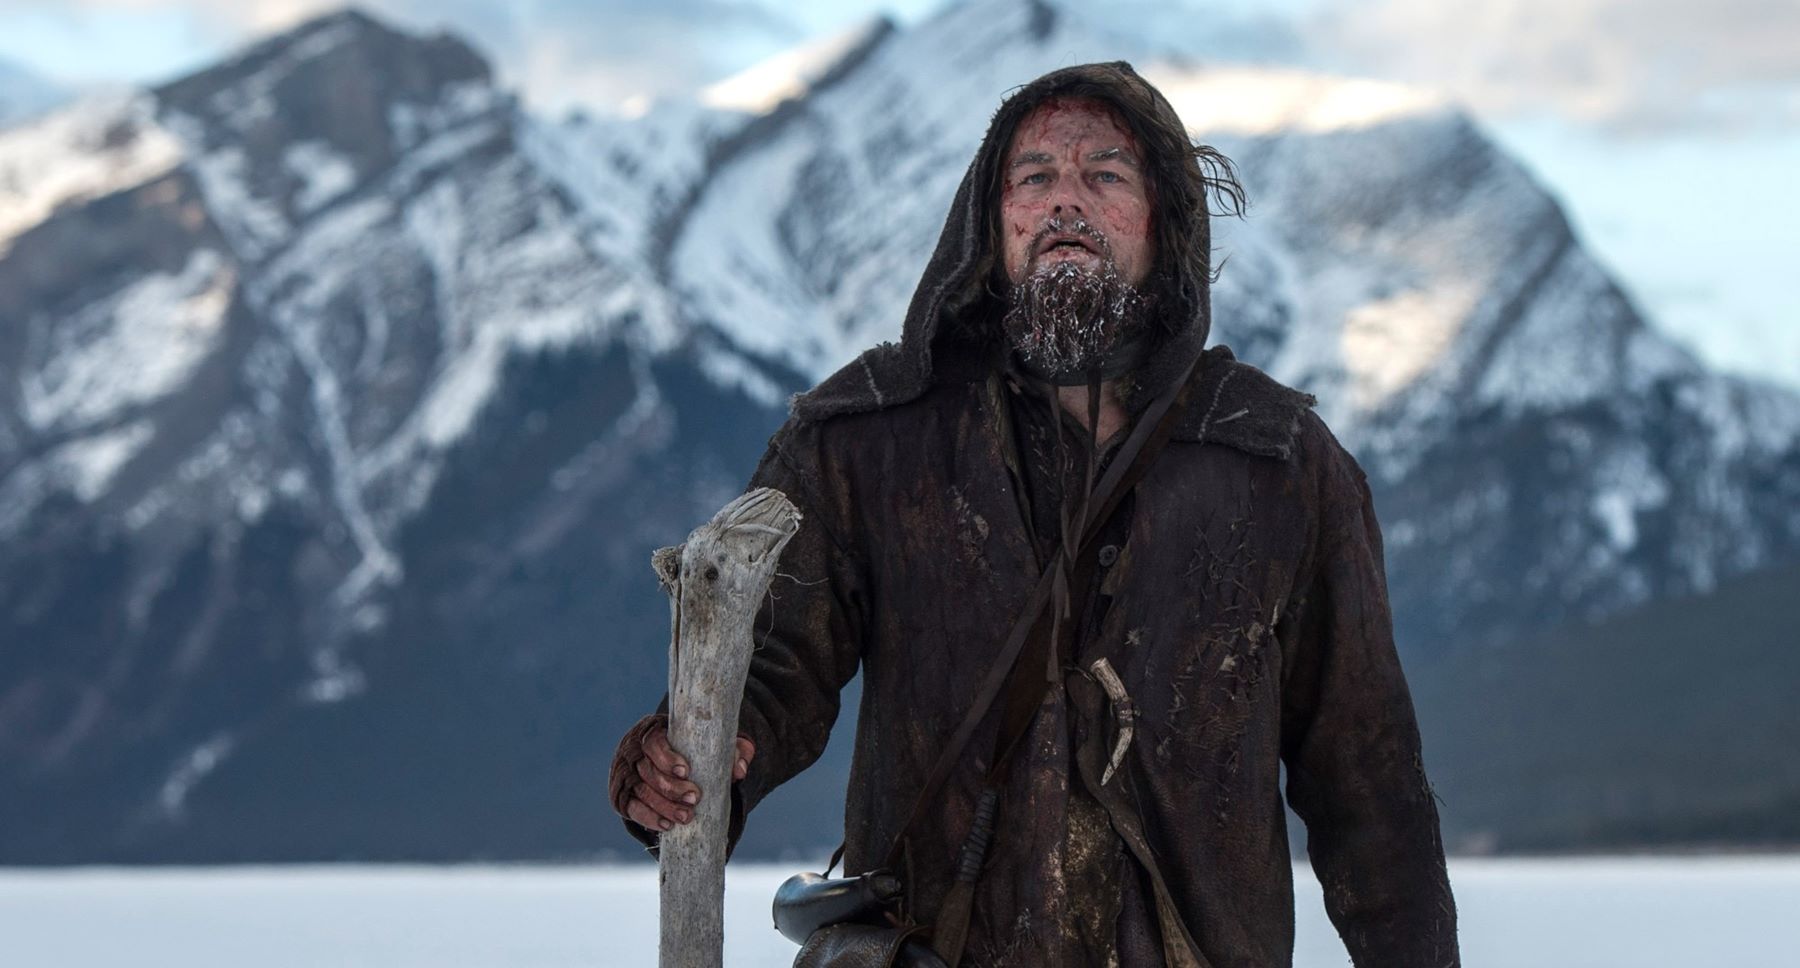 How To Watch ‘The Revenant’ on Netflix